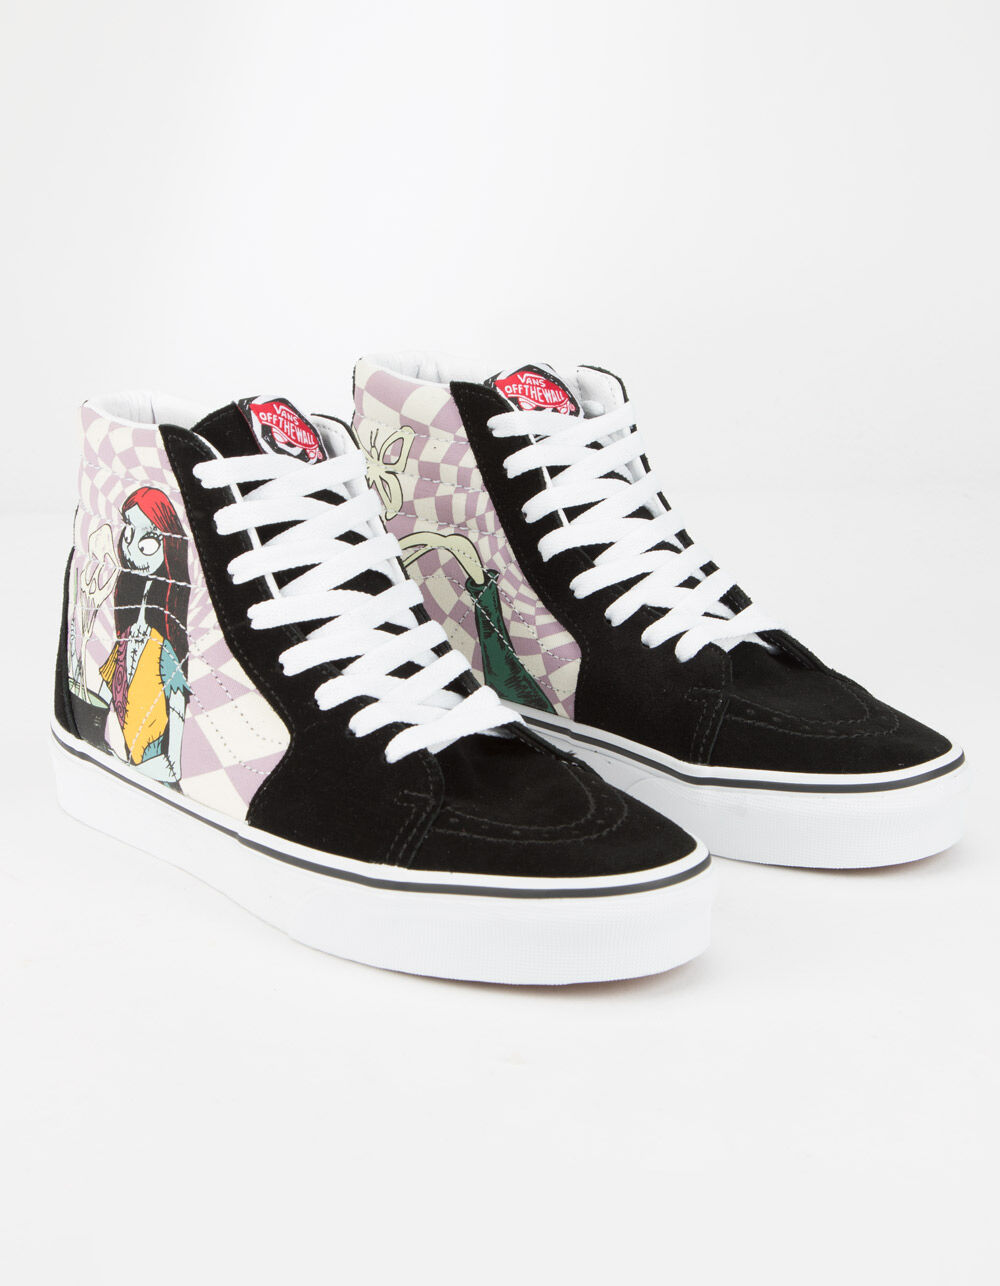 VANS x The Nightmare Before Christmas Sk8-Hi Sally's Potion Womens Shoes